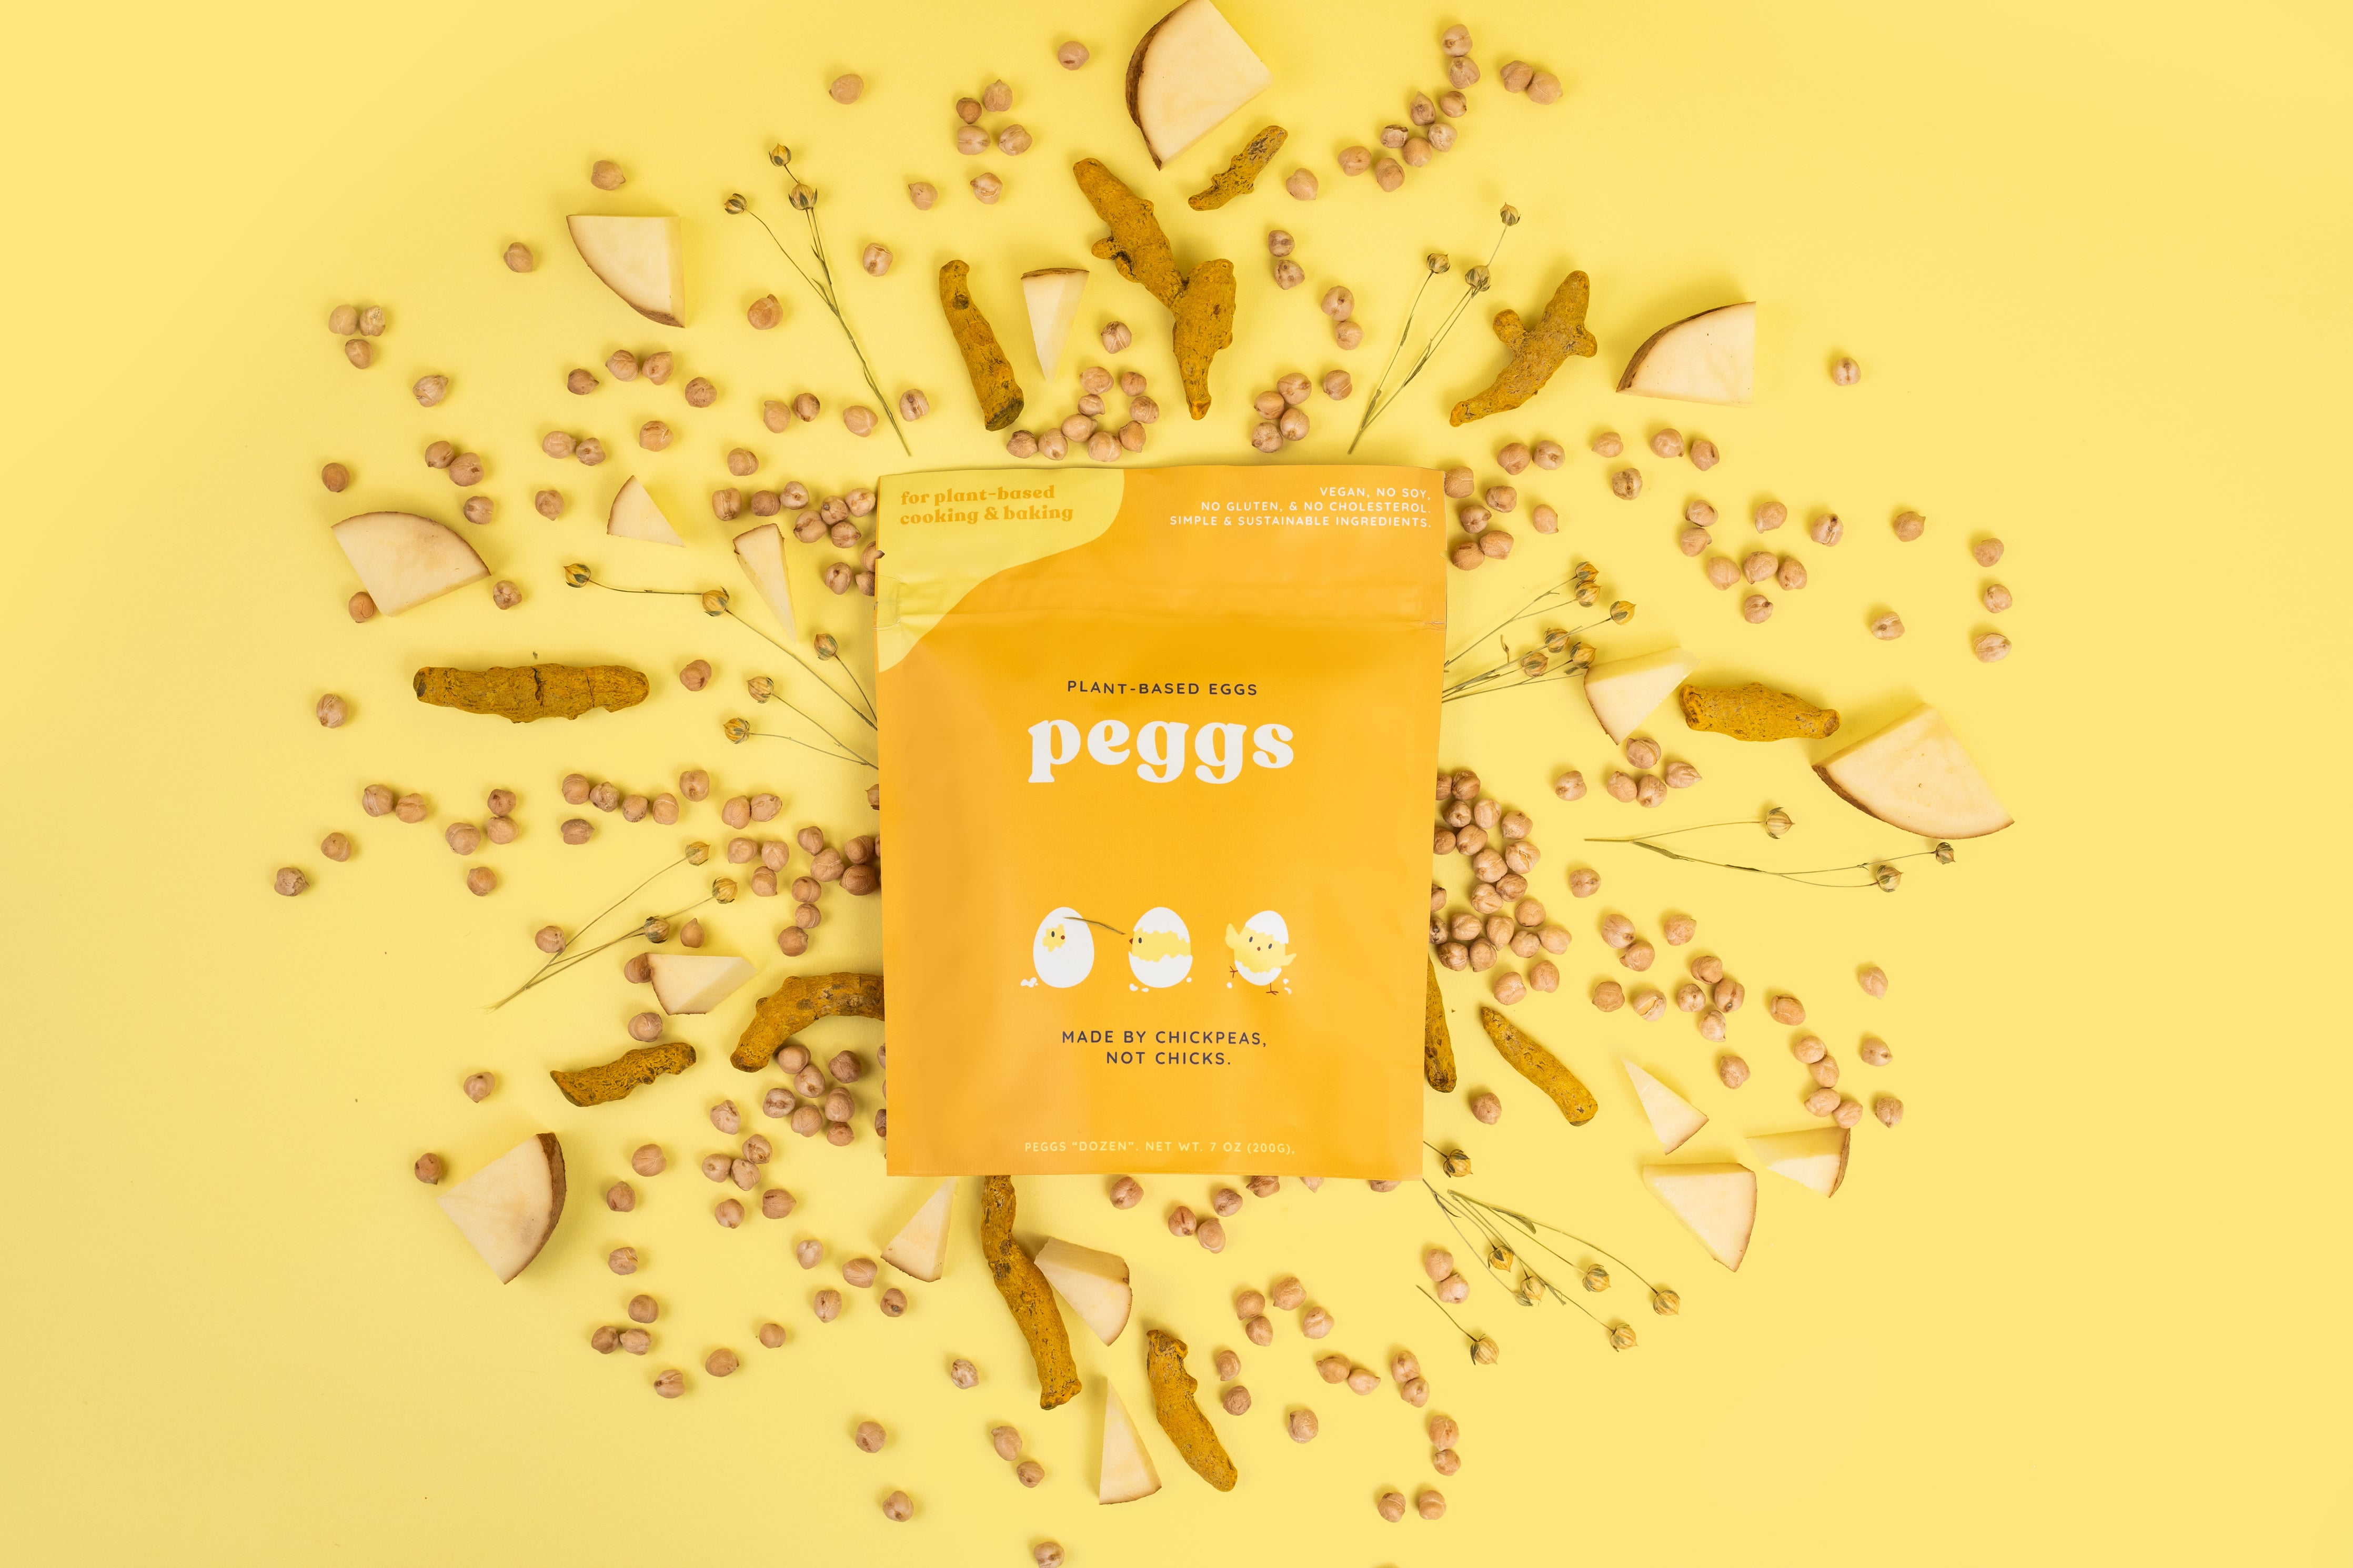 Peggs are an egg replacer that uses real, clean ingredients. 